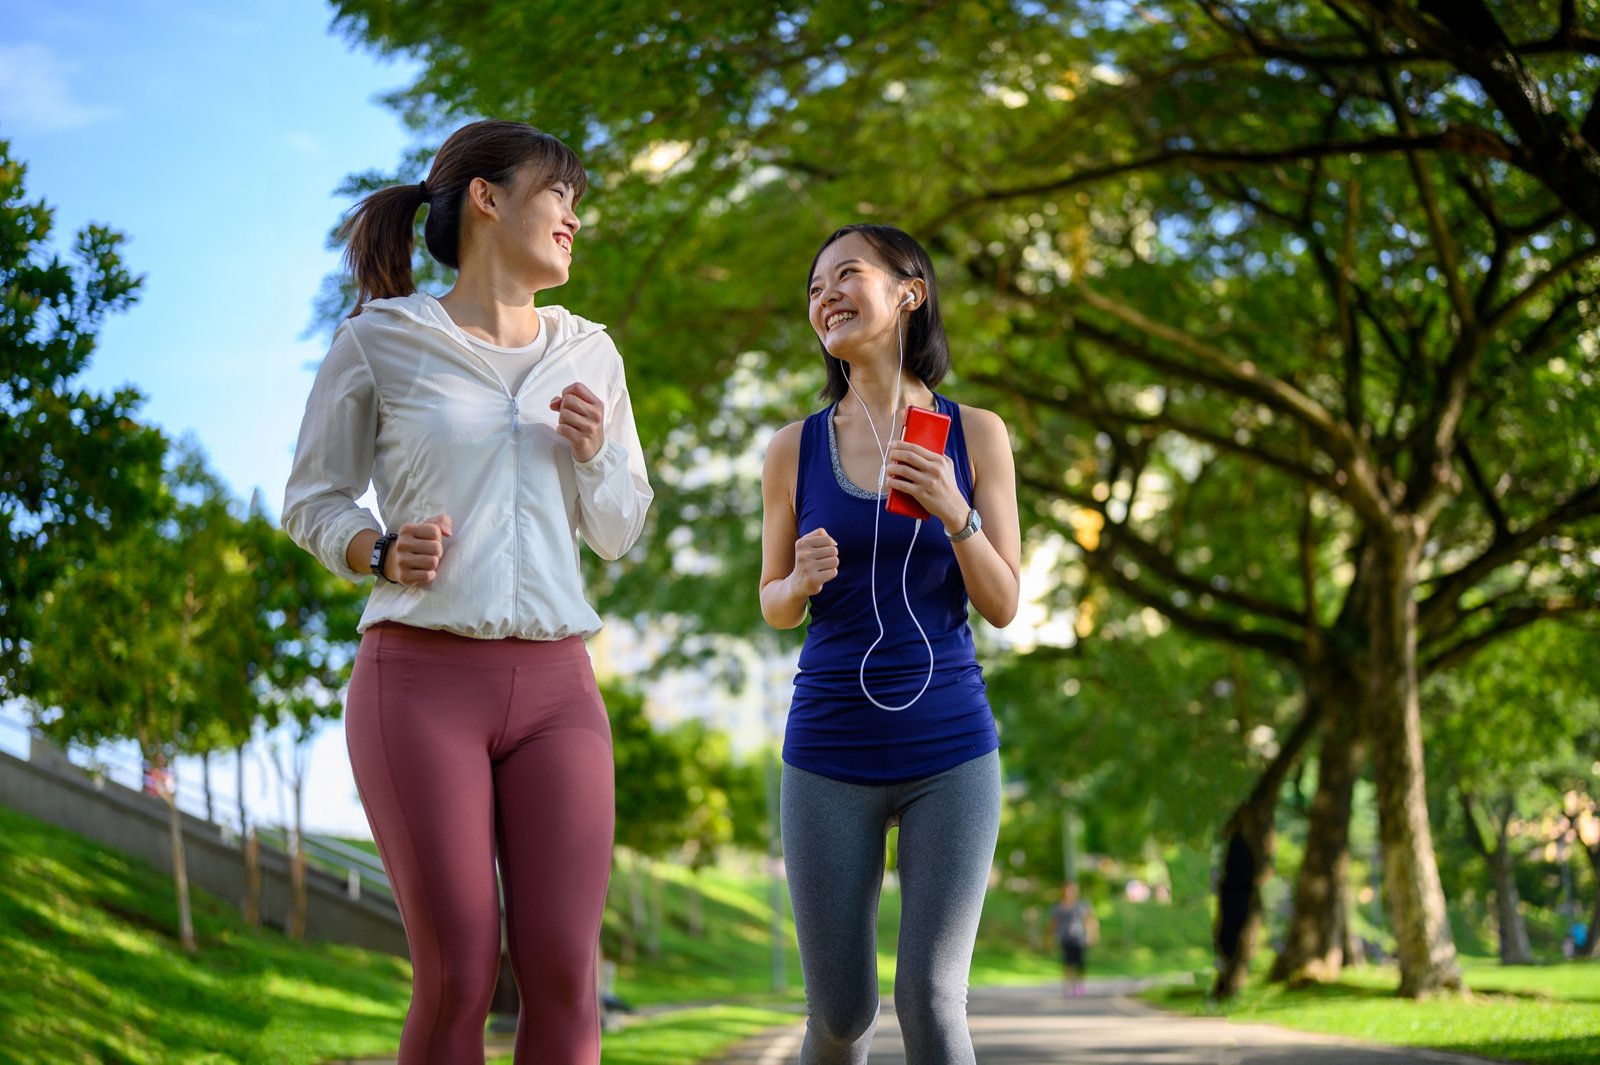 Brisk walking tips from experts